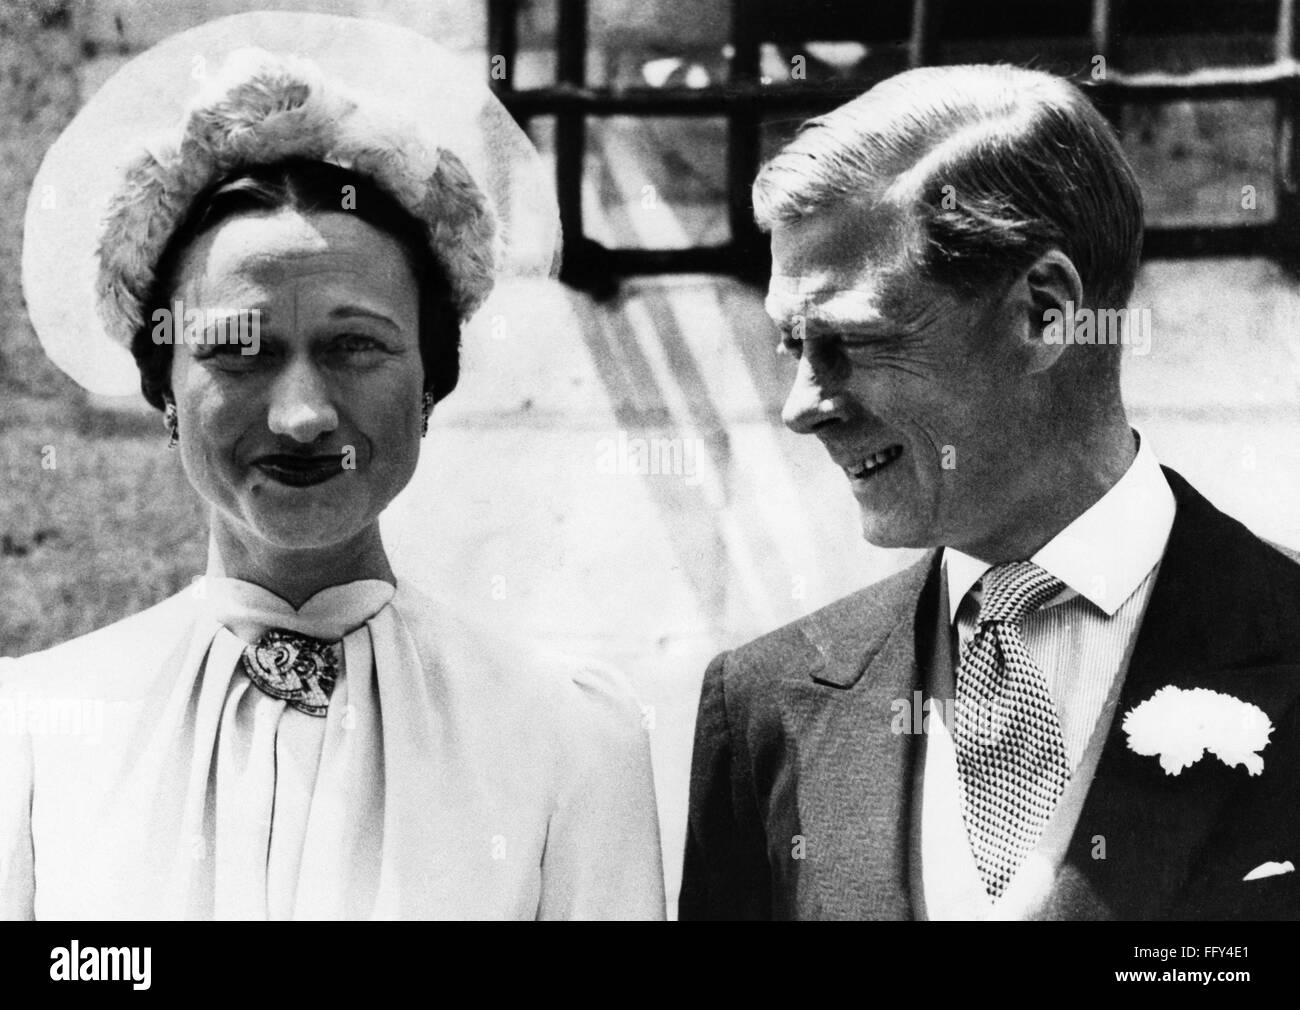 EDWARD VIII (1894-1972). /nKing of Great Britain, 1936. The Duke and ...